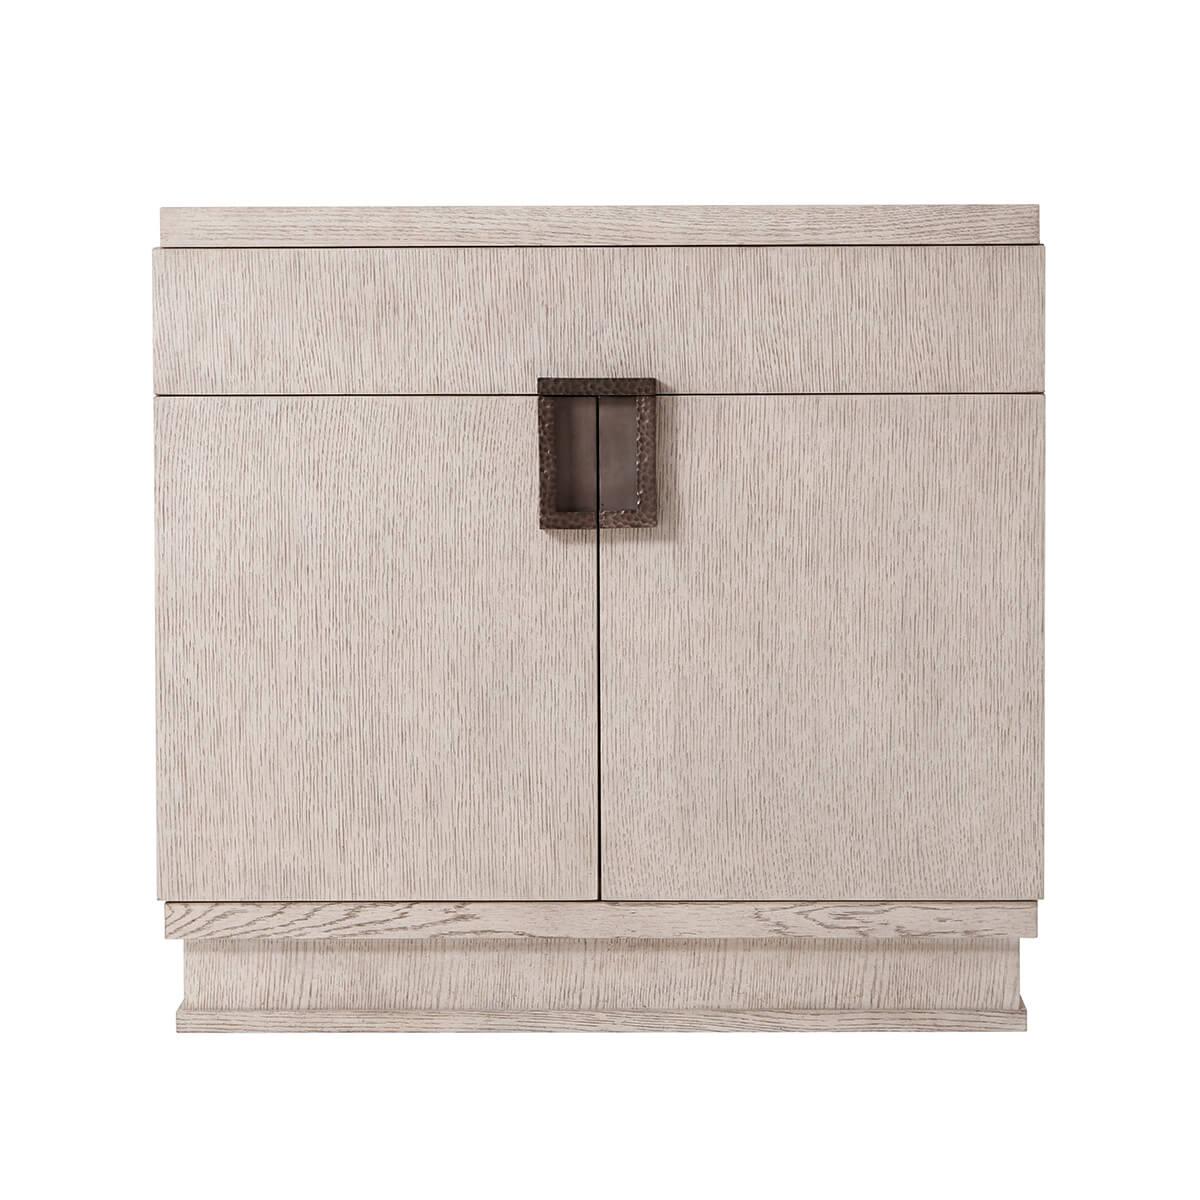 With a quartered oak veneer in the Gowan finish. With a rectangular top above a frieze drawer and two cabinet doors. With a modern brass finish handle with a hammered design. 
Dimensions: 30